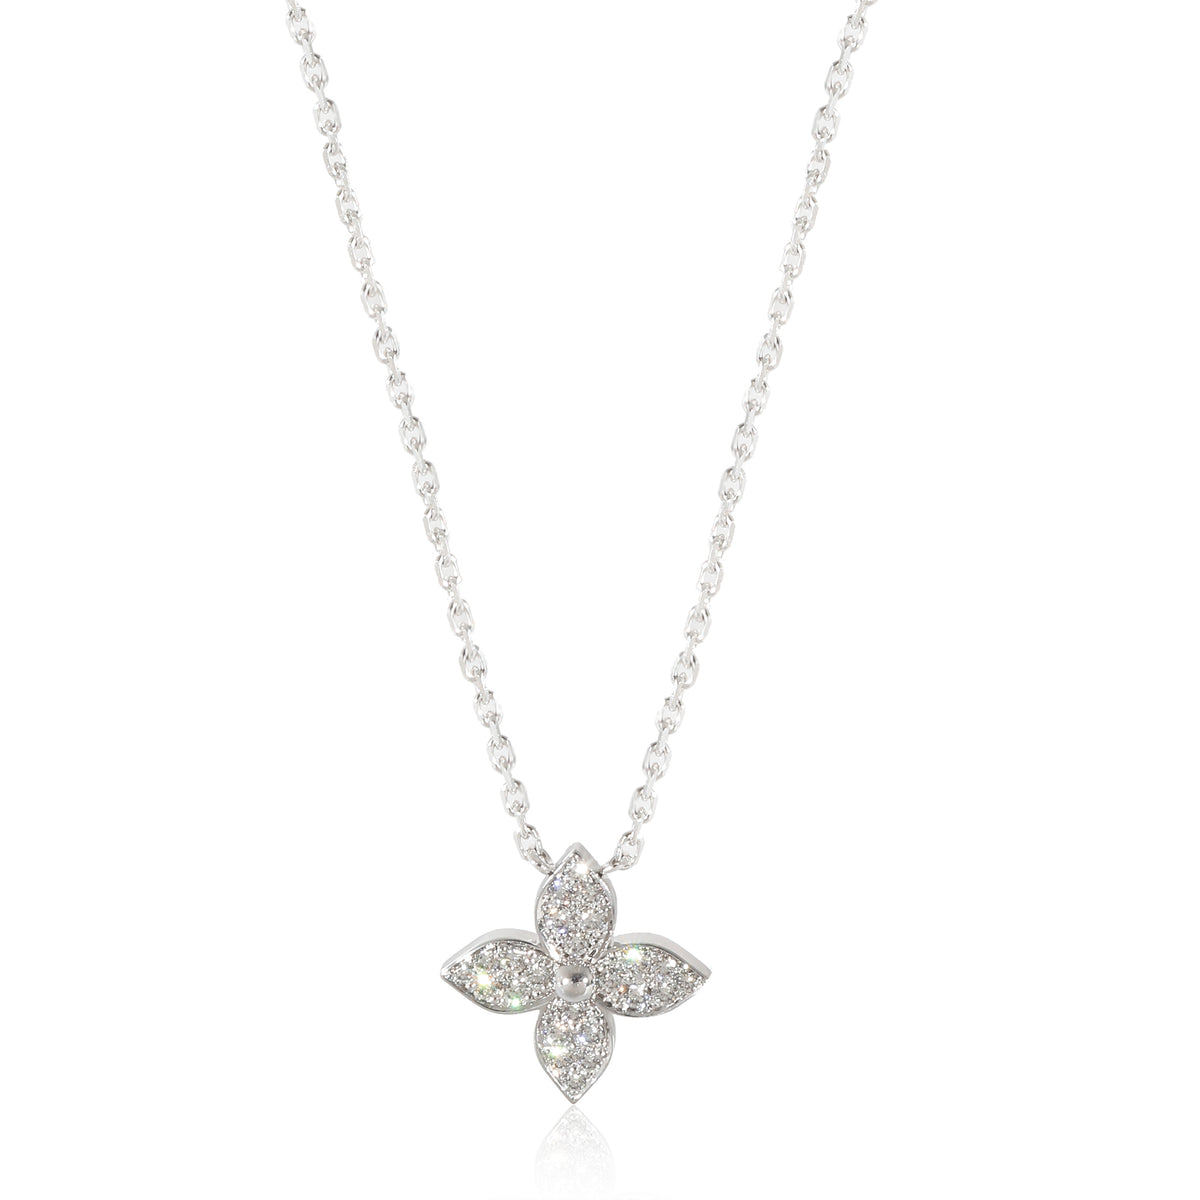 Idylle Blossom Necklace, White Gold, Diamonds - Categories